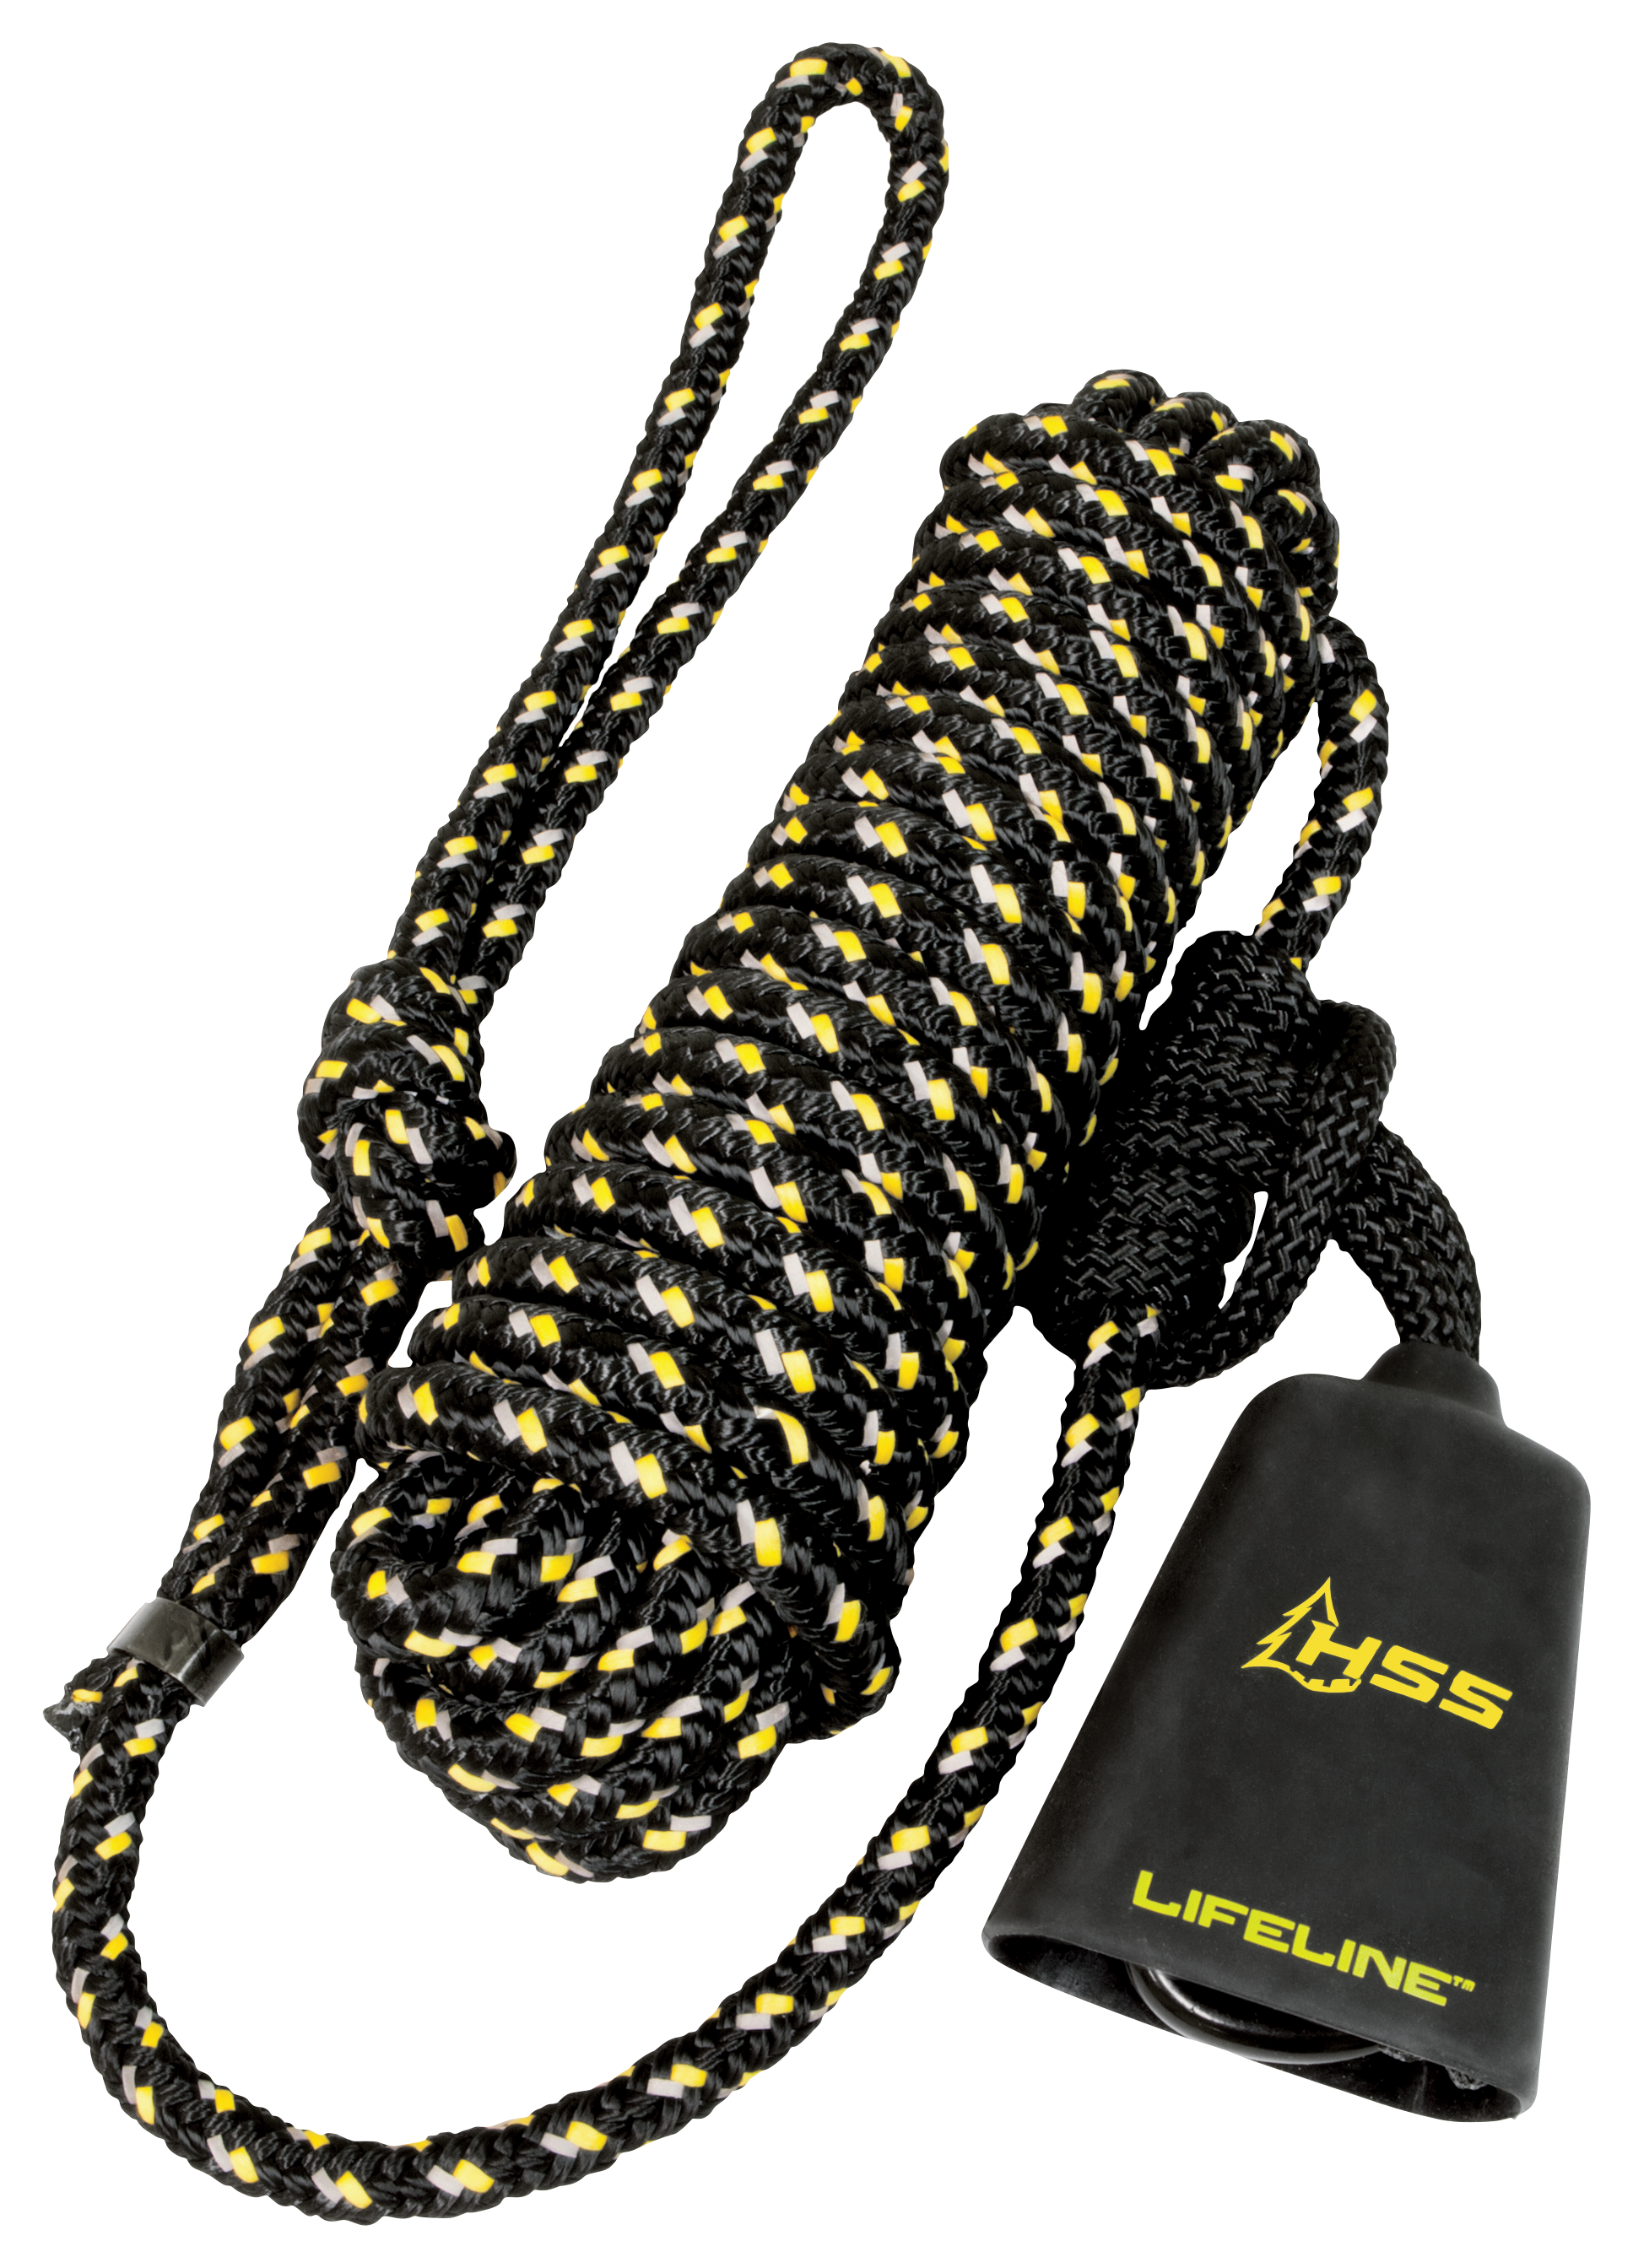 ROPE LANYARD HANDMADE Using the Finest Quality Rope and Marine Grade  Fittings. Very Strong All Weather for the Toughest of Conditions 